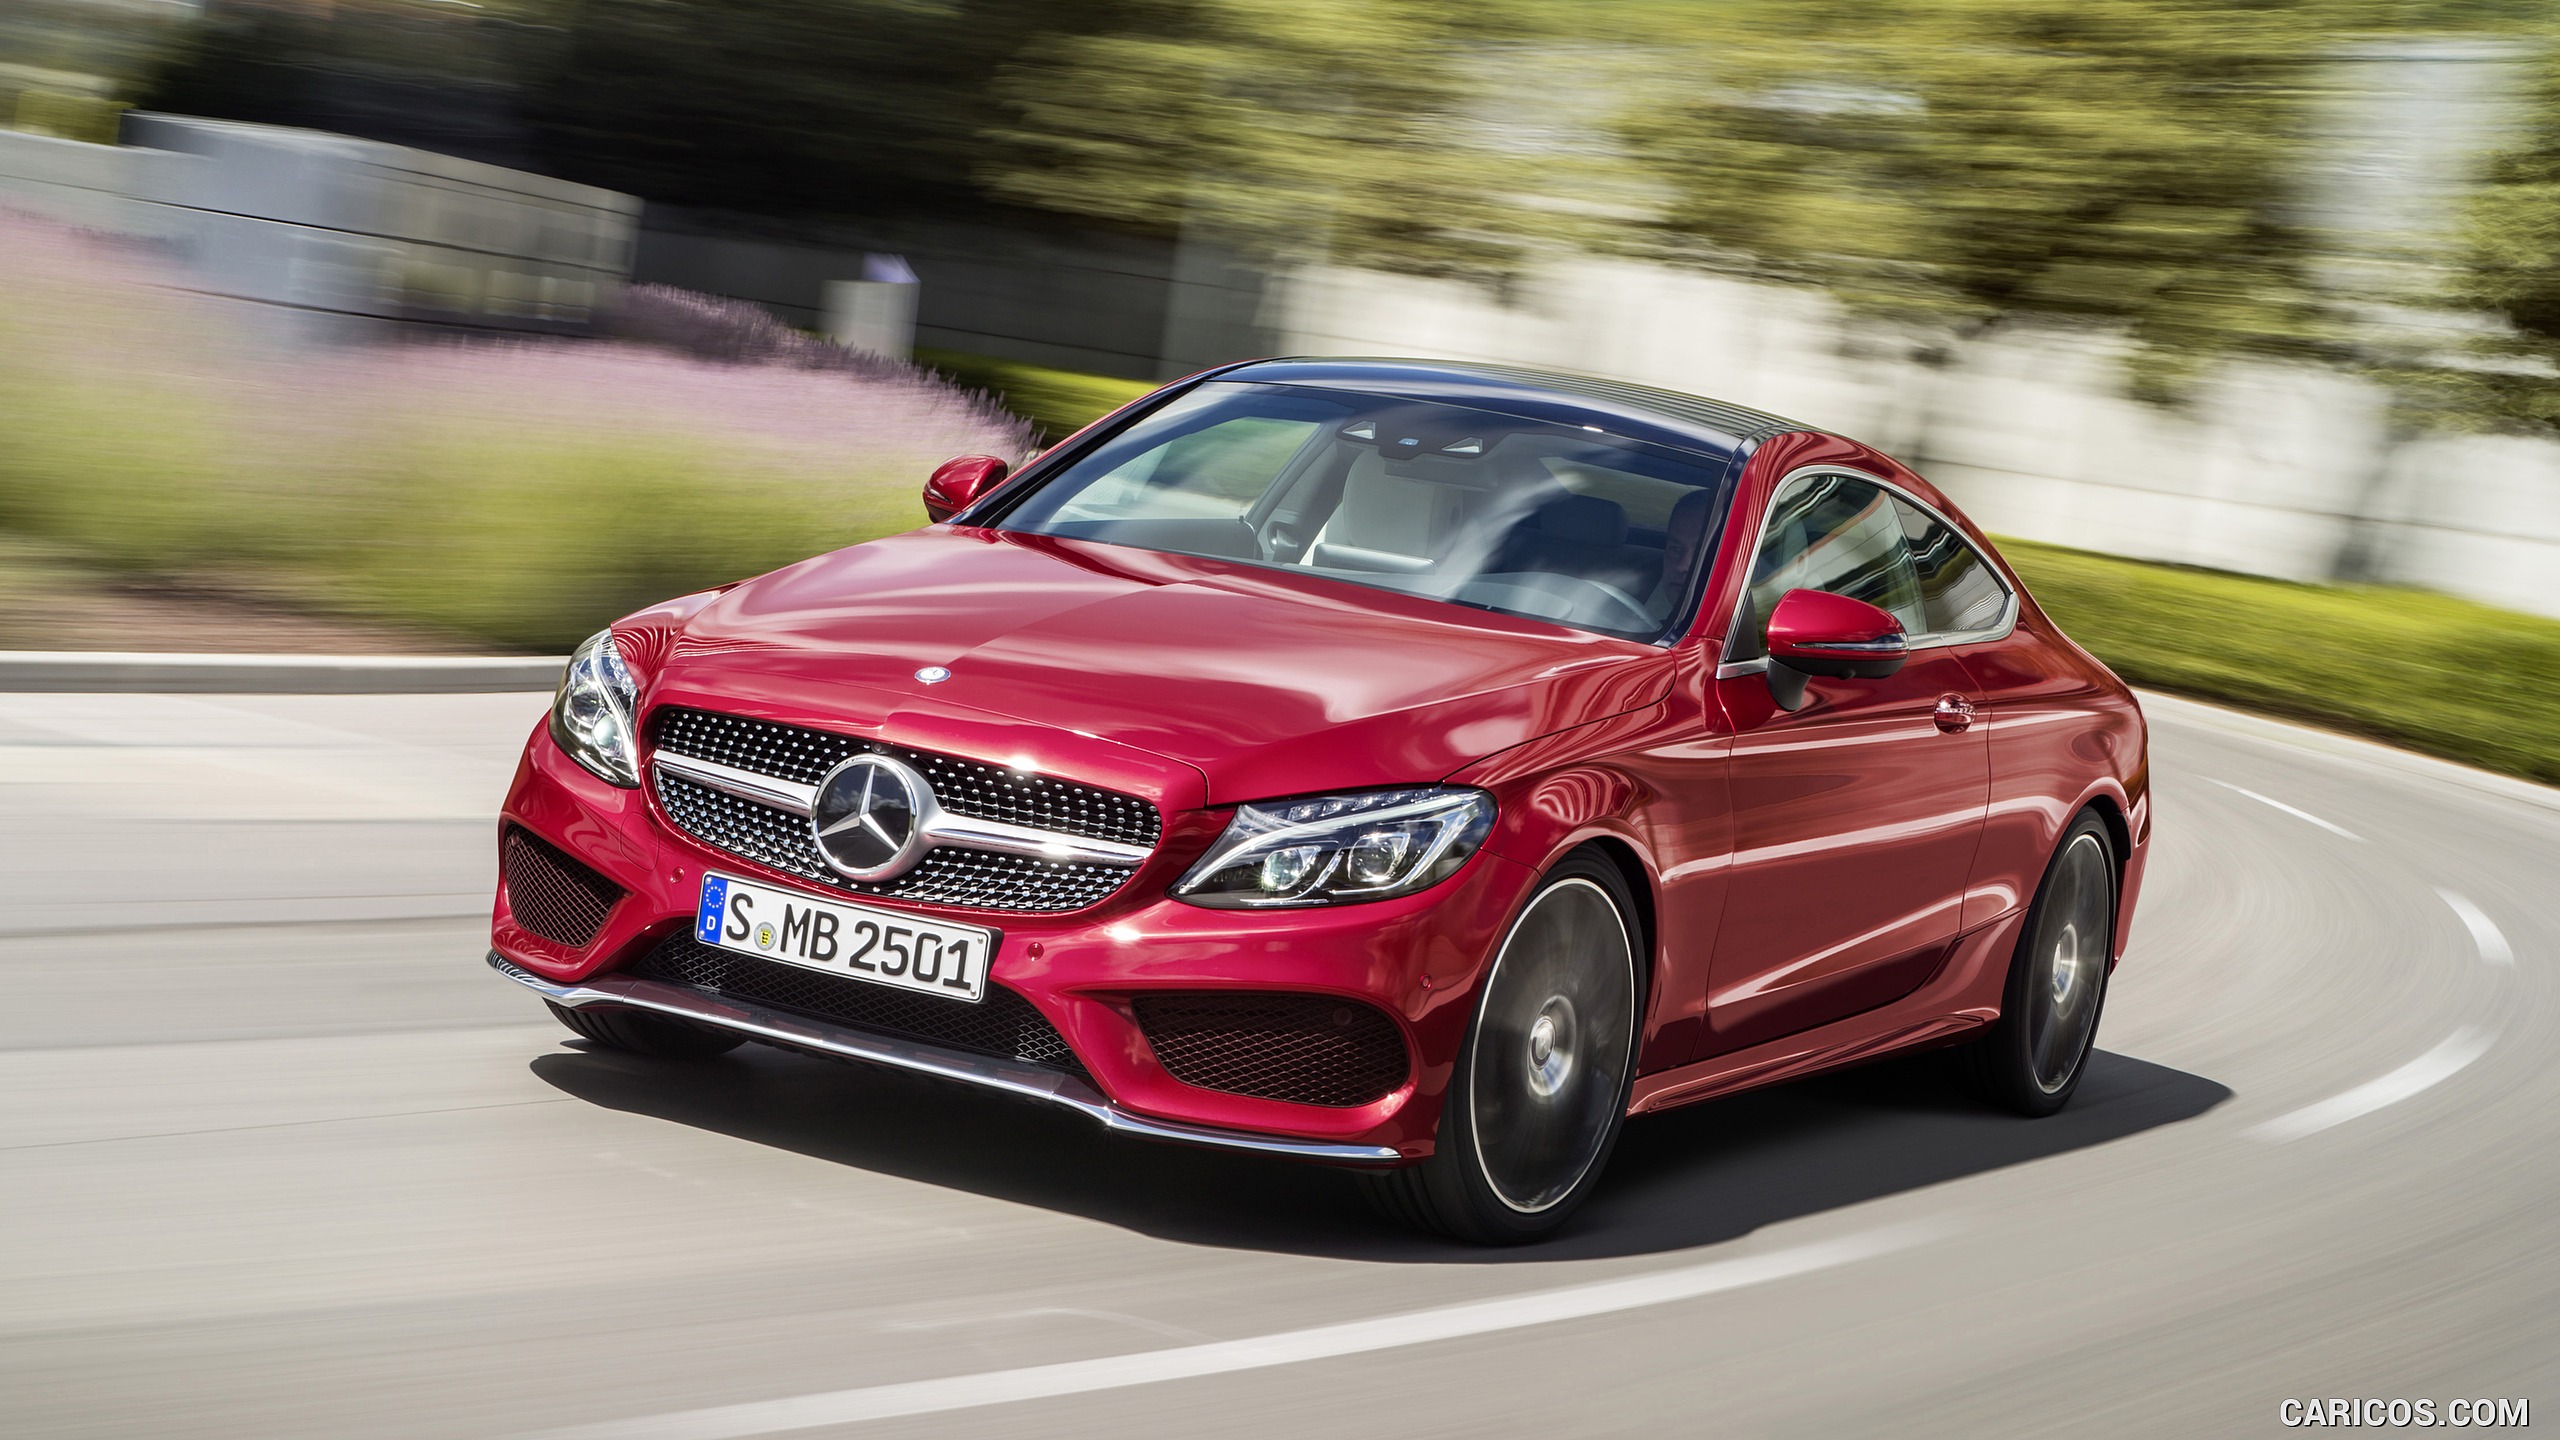 2017 Mercedes-Benz C-Class Coupe C250 d 4MATIC (Hyacinth Red) - Front, #65 of 210